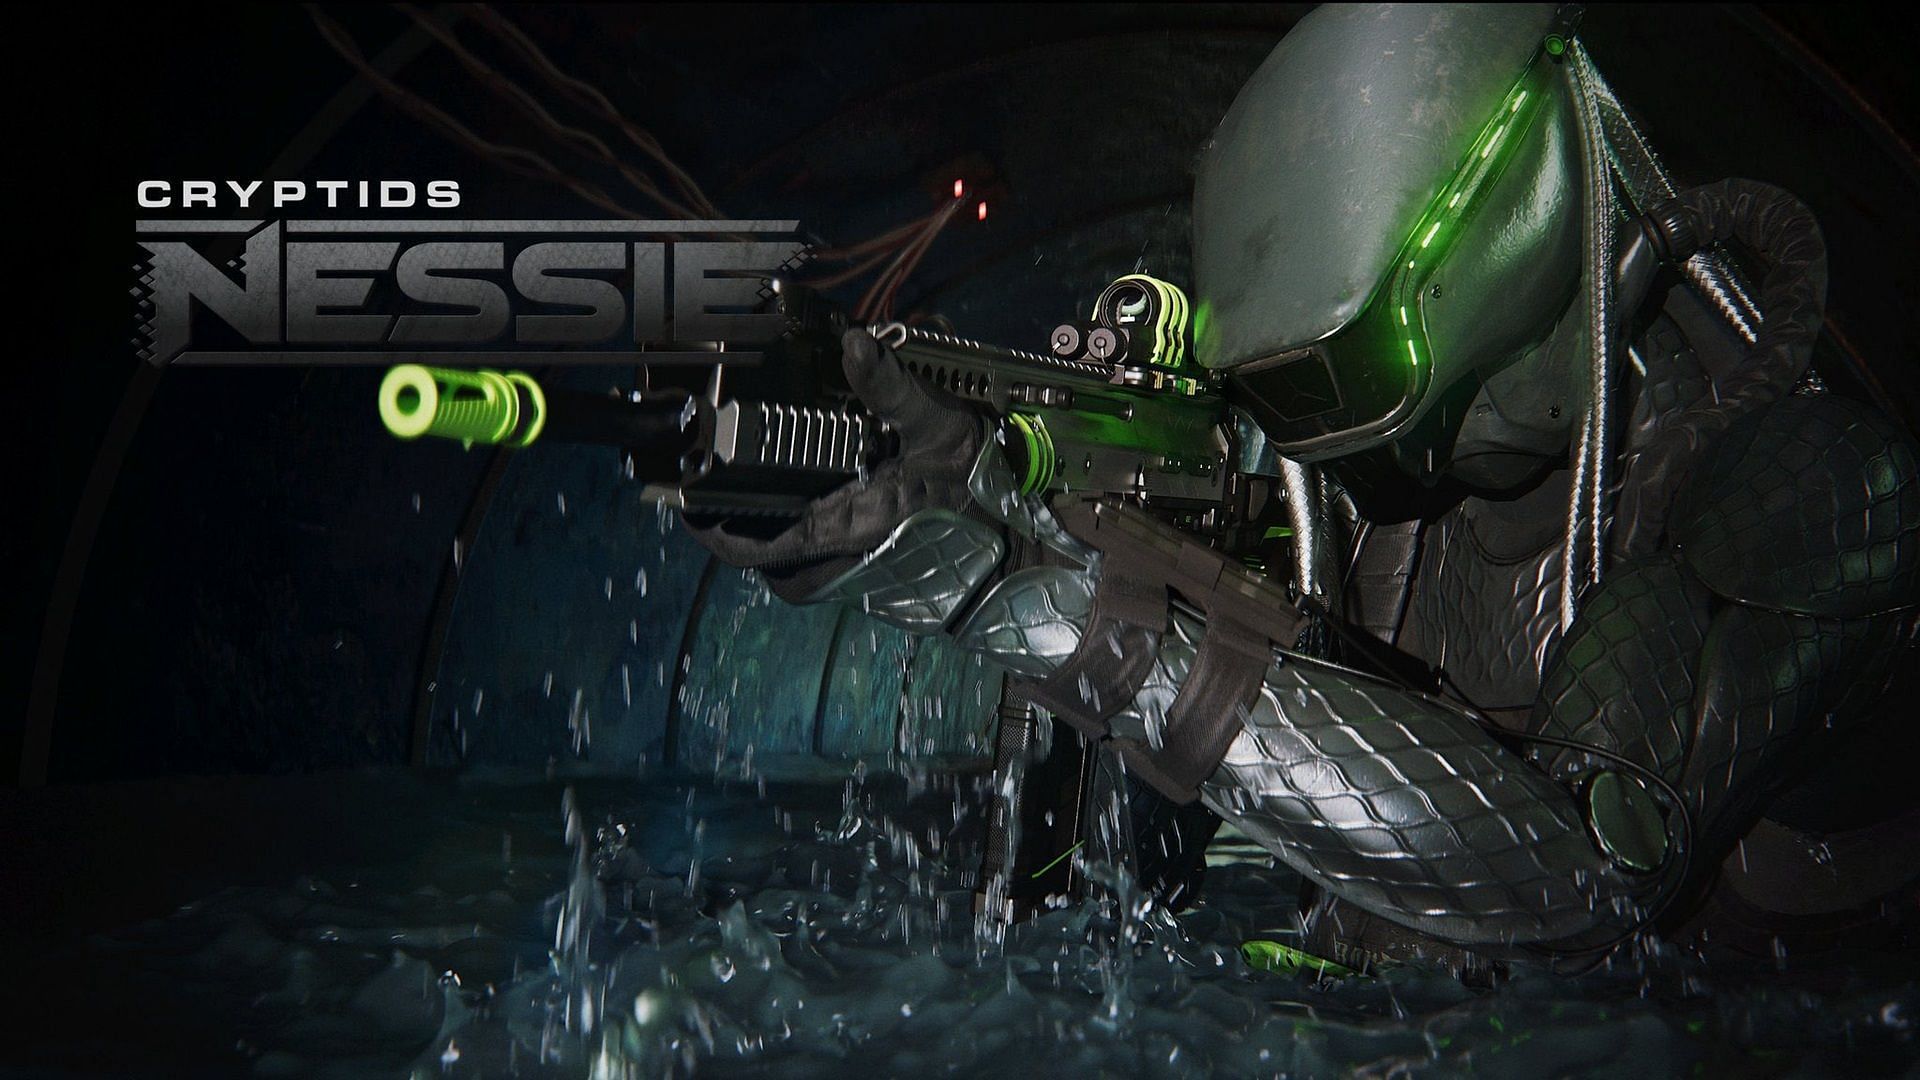 Operator Nessie in the Cryptids Nessie Operator Bundle in MW3 and Warzone